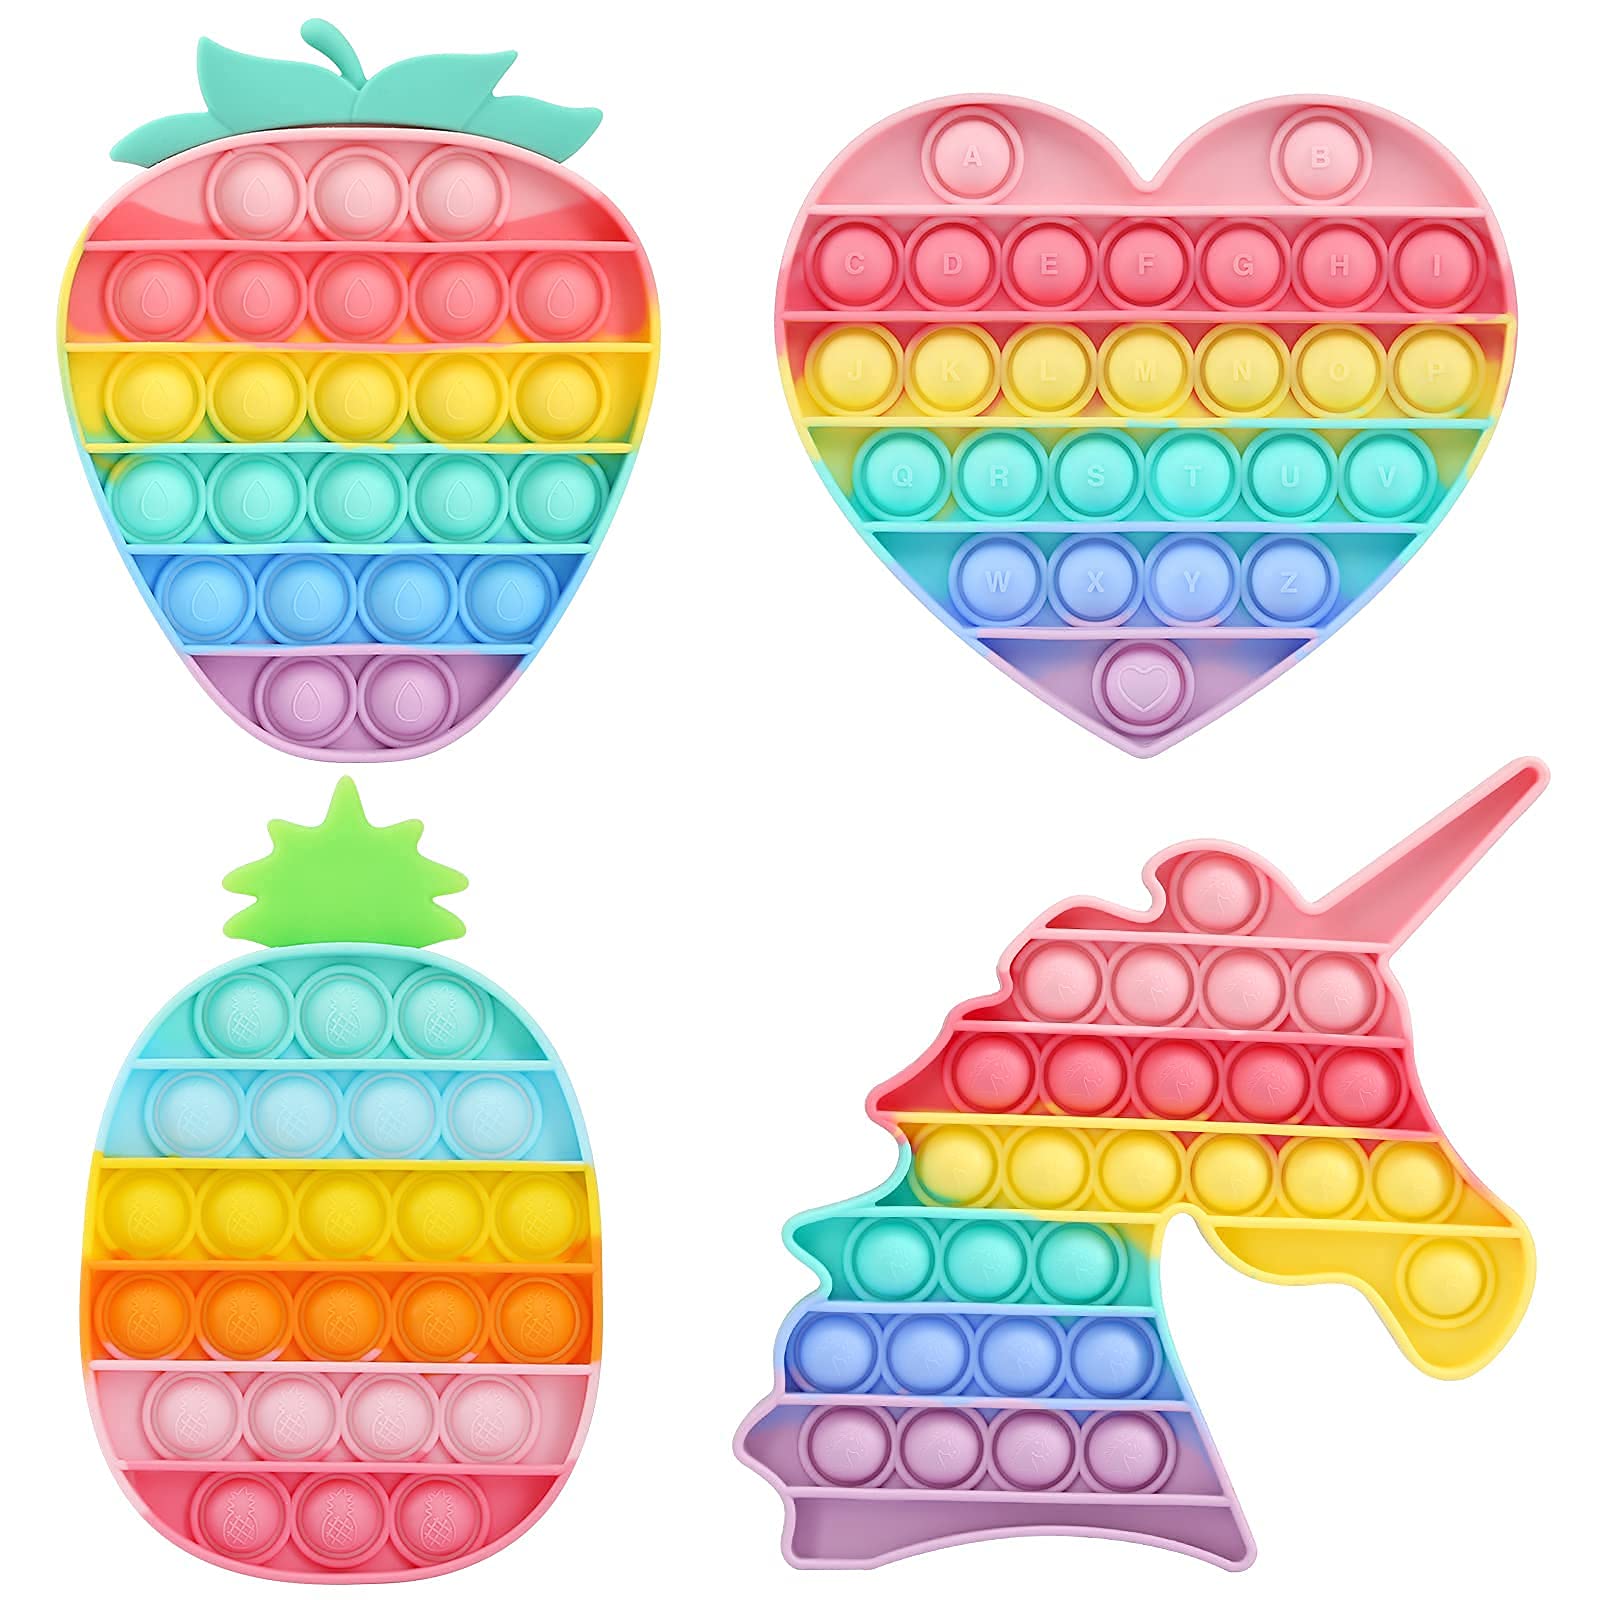 HiUnicorn 4 Pack Poppers Pop Sound Fidget Toys Gifts for Girls, Rainbow Unicorn Push Bubble Popping Game Toy BPA-Free Silicone, Macaron Pineapple Strawberry Fruits Sensory Toys Anxiety Reliever